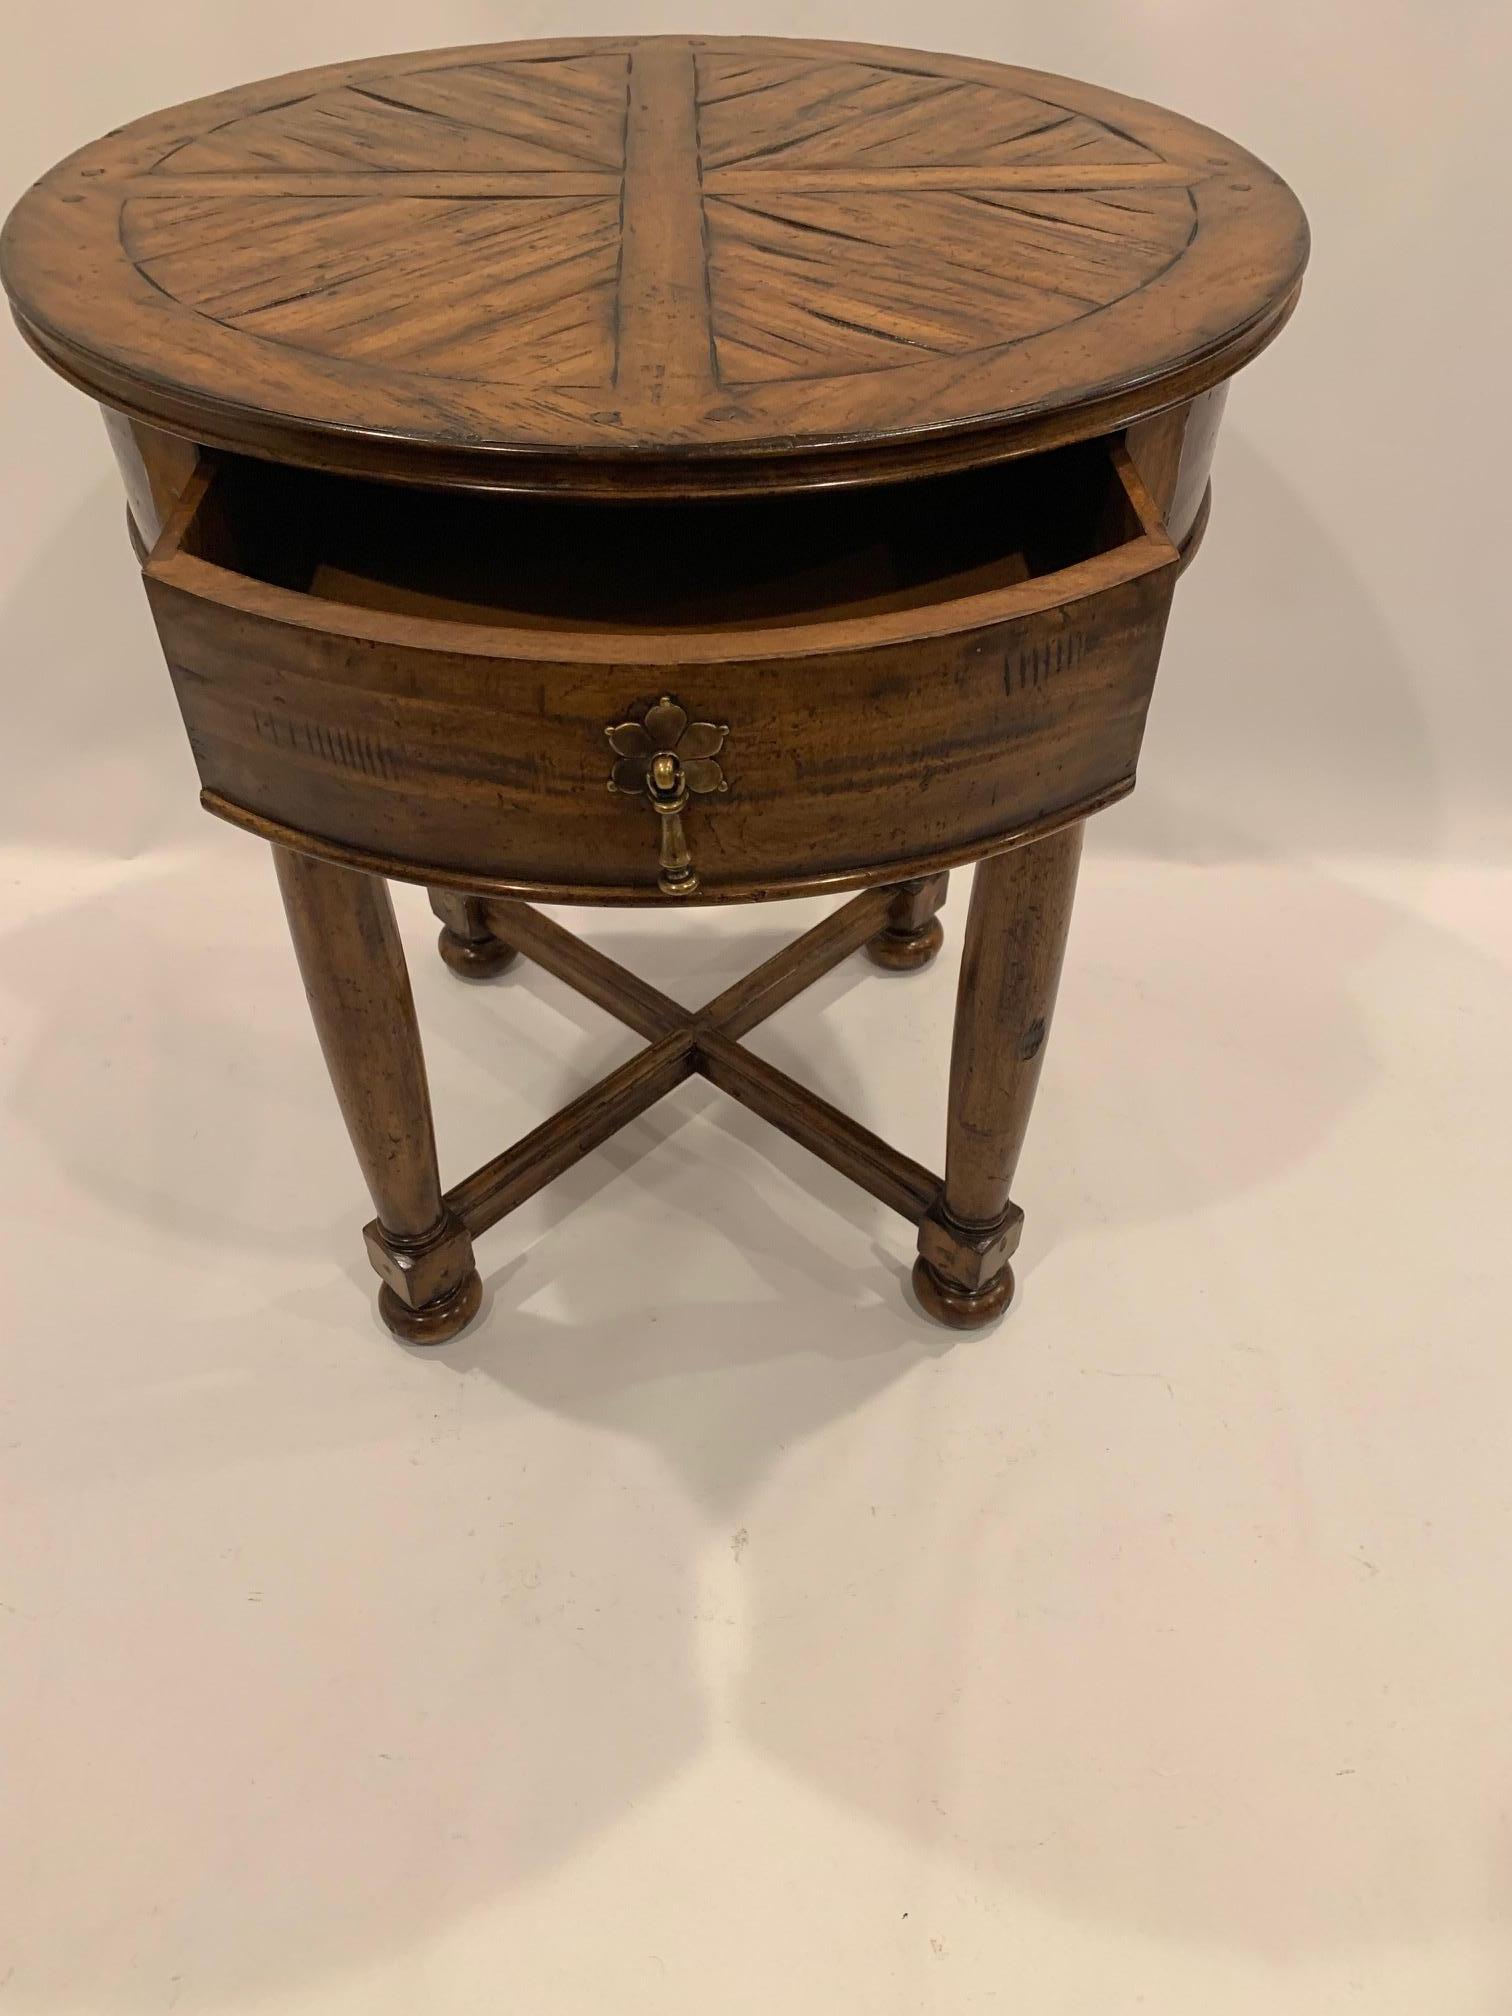 Contemporary Stunning Guy Chaddock Round Hardwood Side Table with Single Drawer